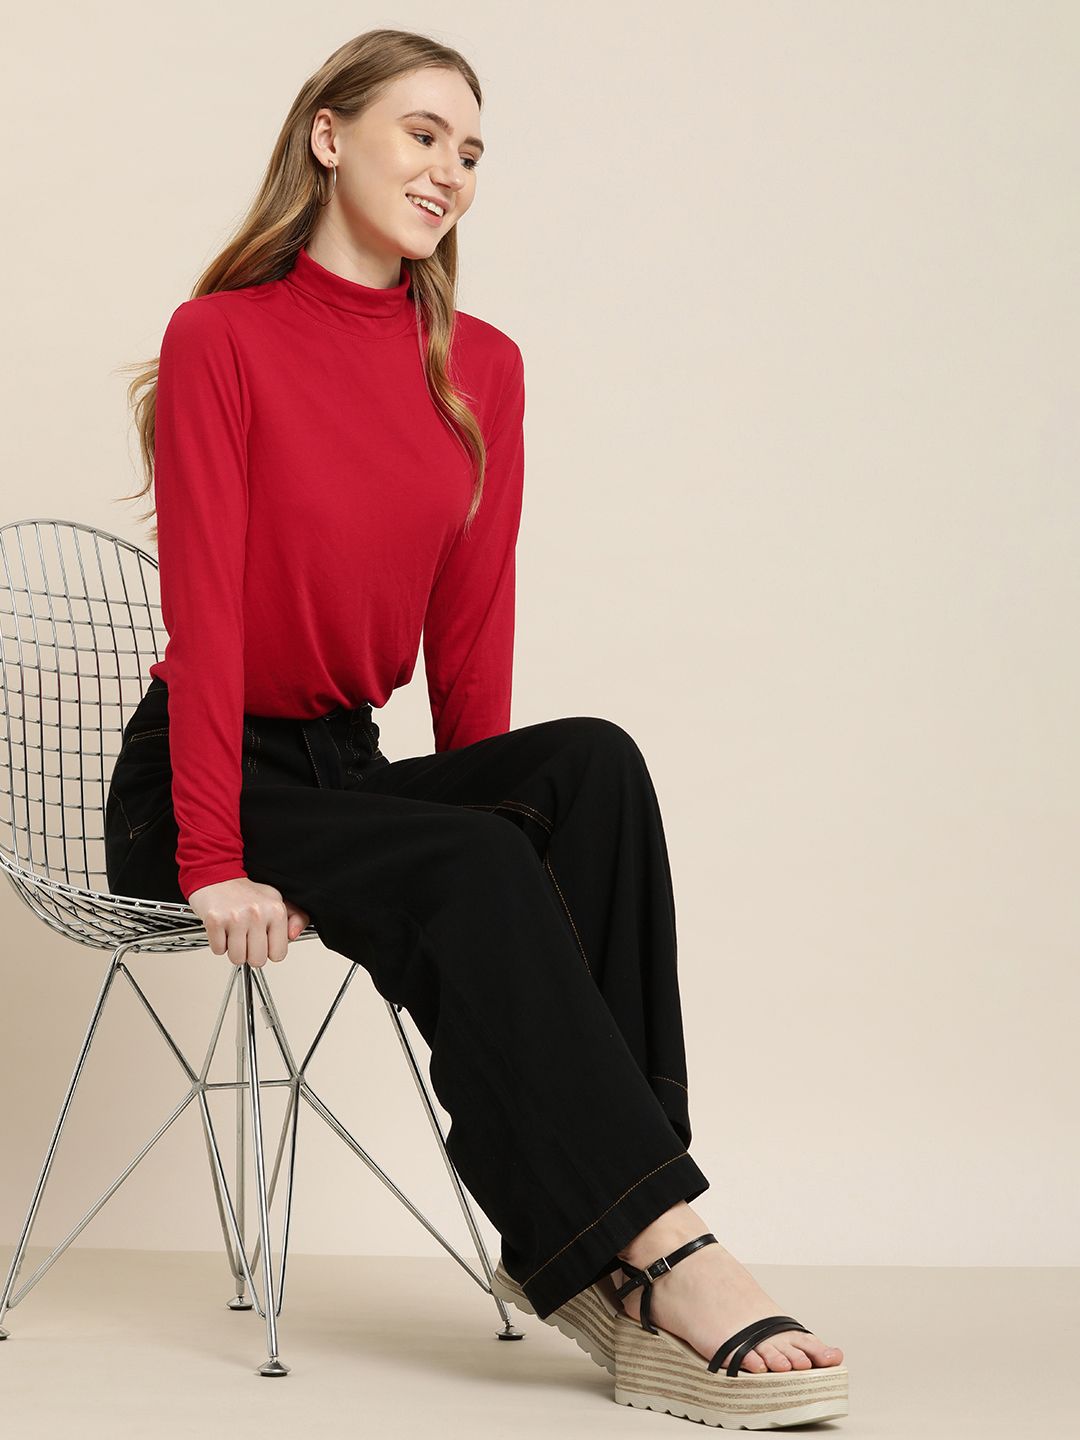 encore by INVICTUS Solid High Neck Long Sleeves Top Price in India